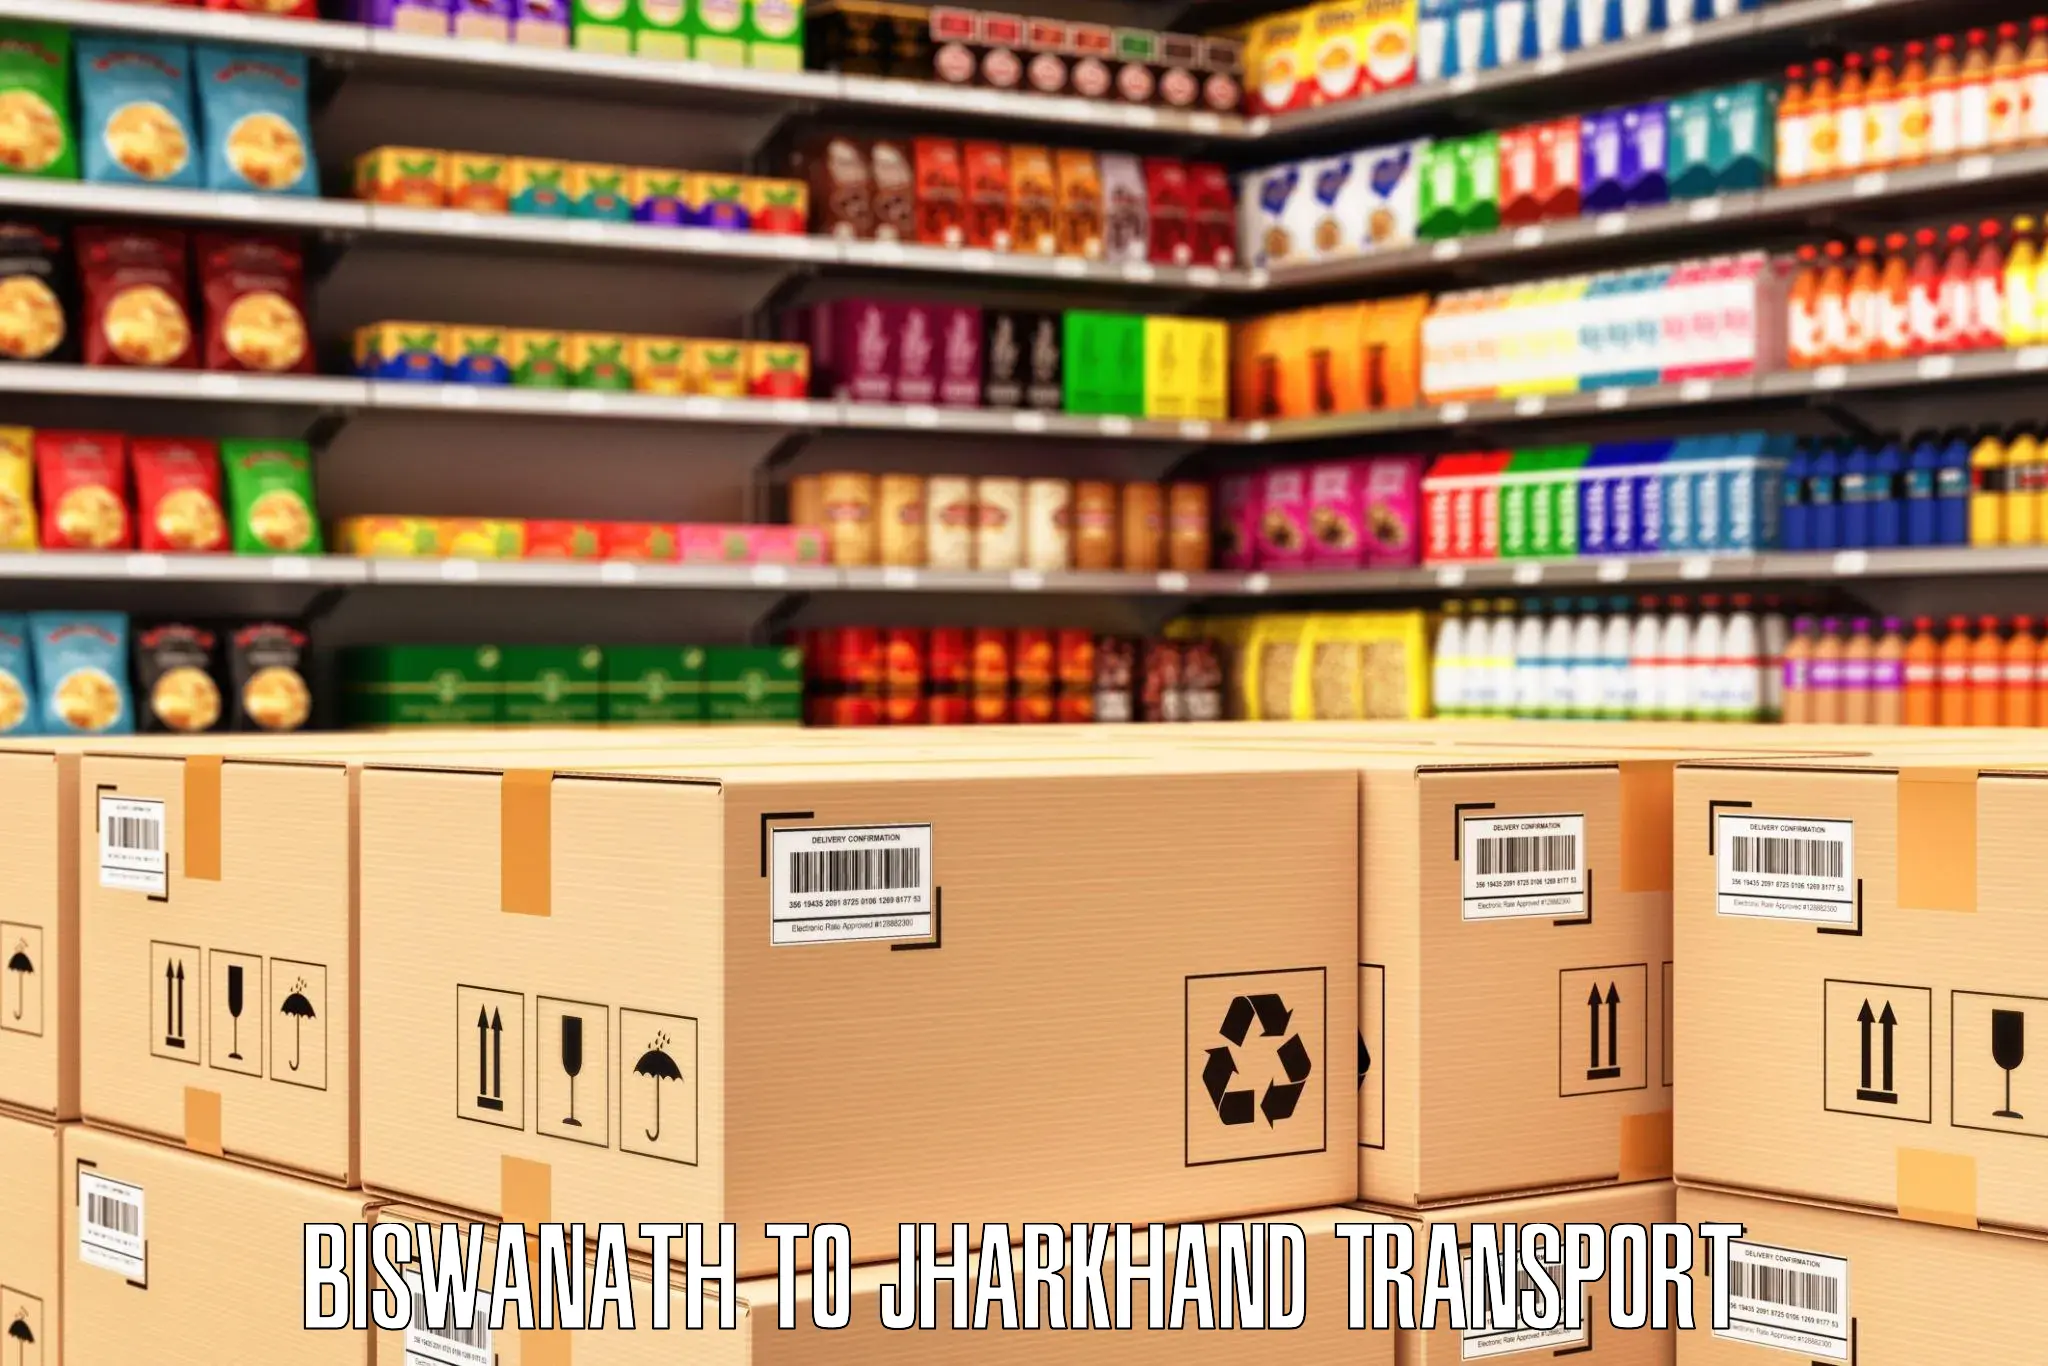 Truck transport companies in India Biswanath to Barkagaon